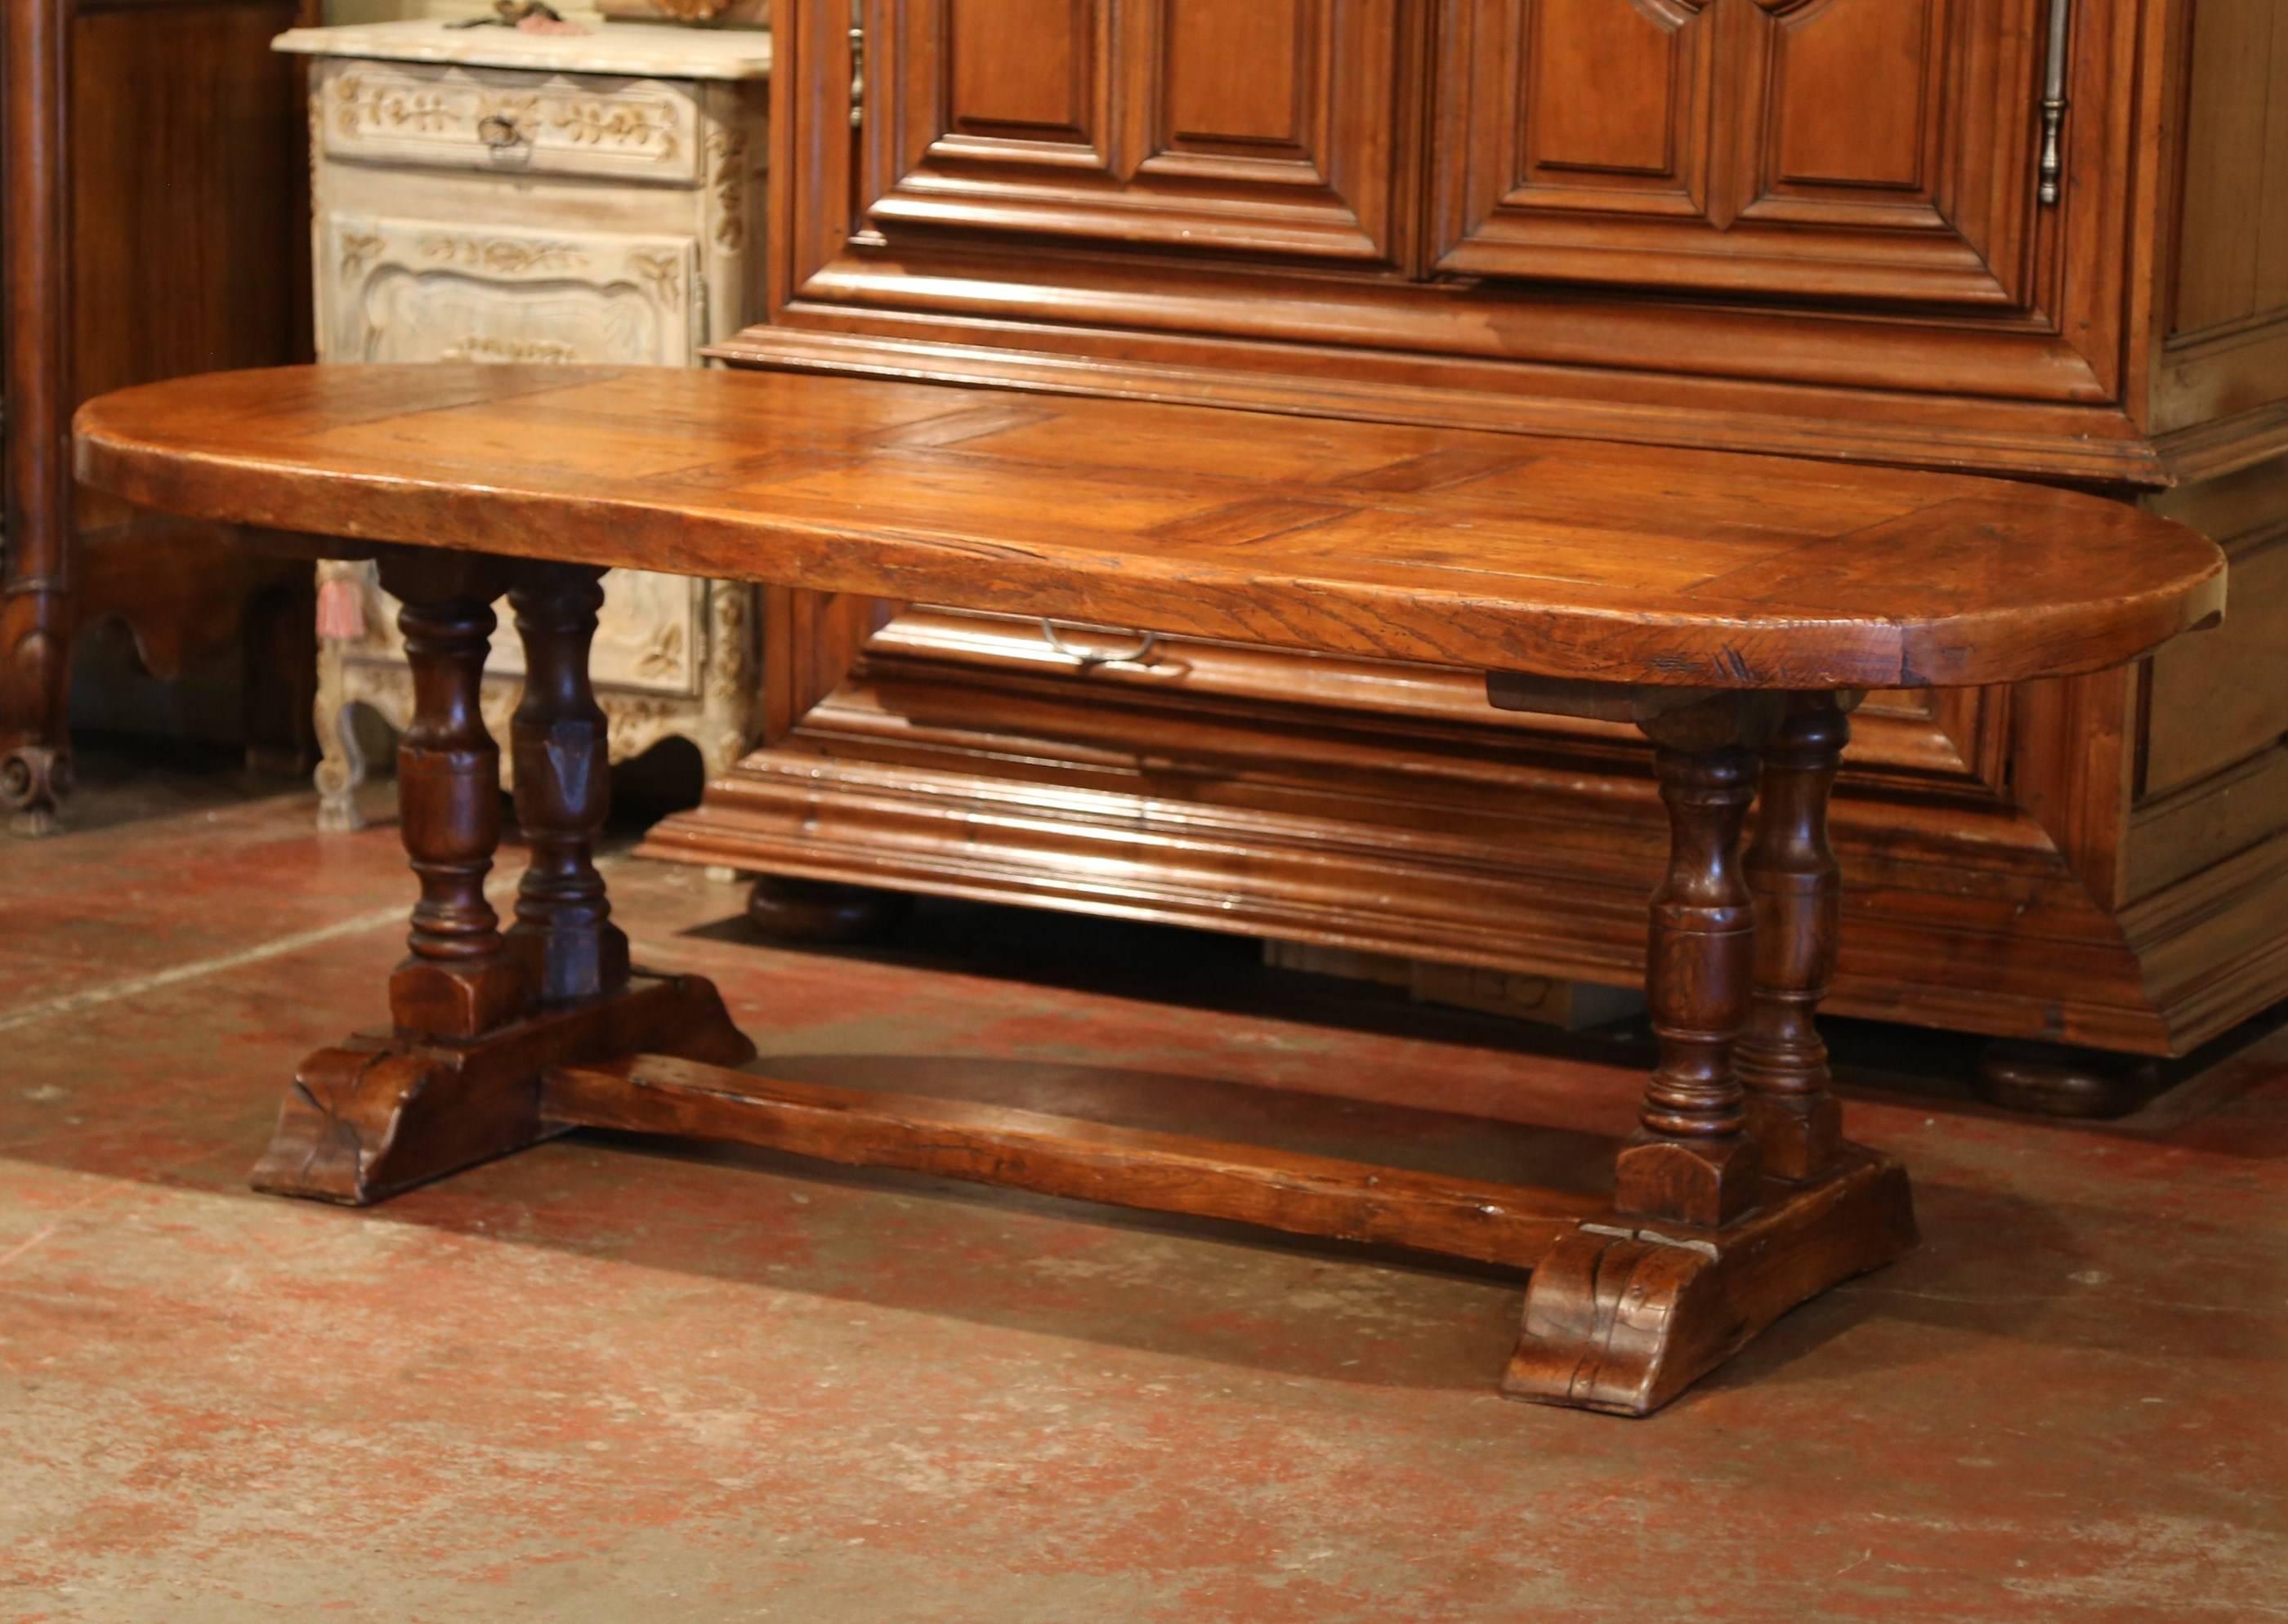 Crafted in Normandy, France circa 1950, this oval breakfast room table features a double-pedestal base with four turned legs. The rustic thick top has a geometric parquetry design with six rectangular panels in the center and demilune panel at each